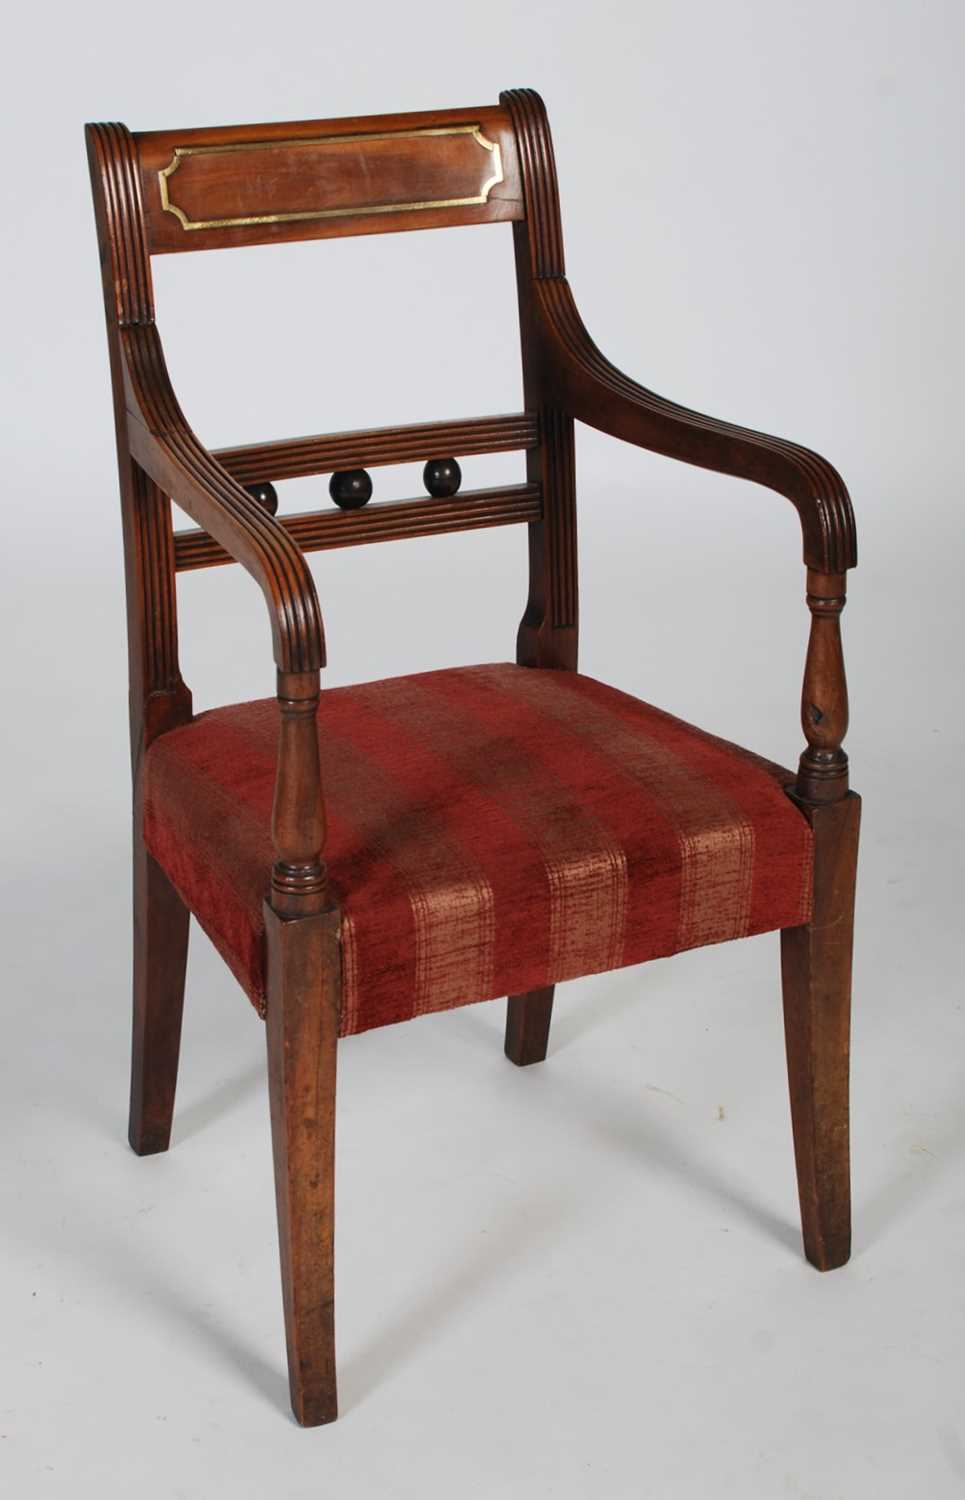 An early 19th century walnut and brass inlaid childs elbow chair, the rectangular top rail with